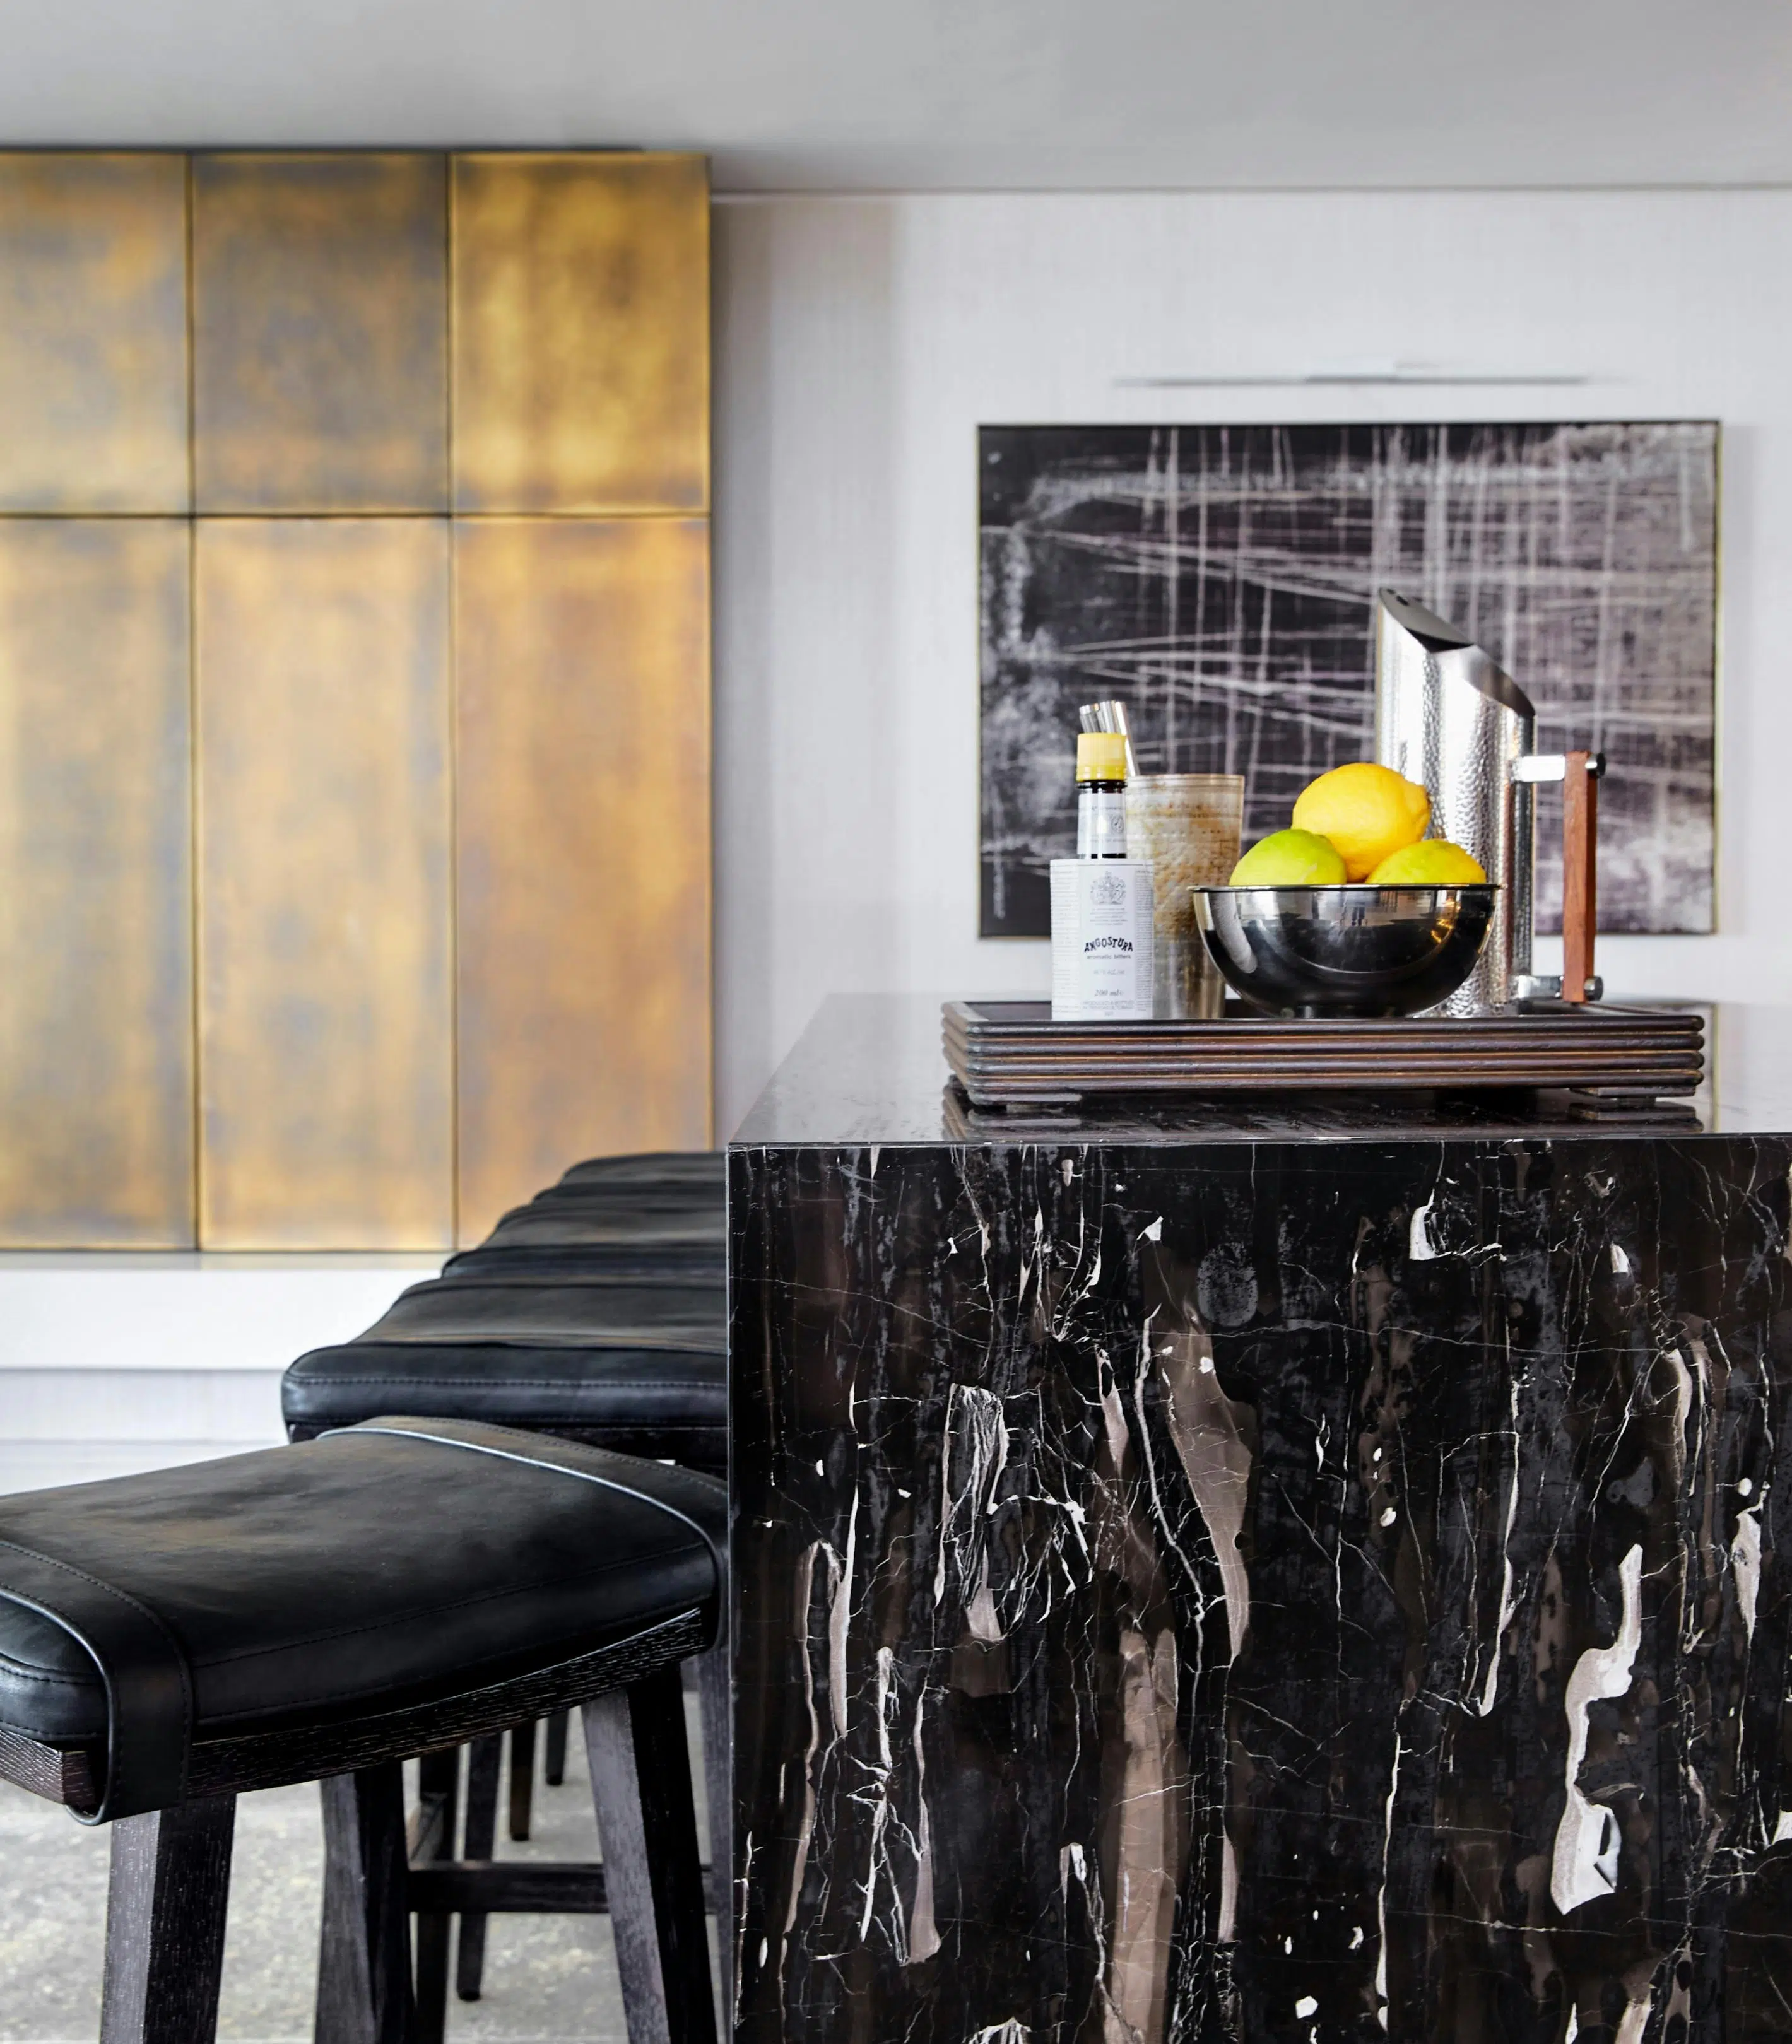 A waterfall, black marble bar with bar stools to the left and artwork with a similar pattern to the marble in the background.